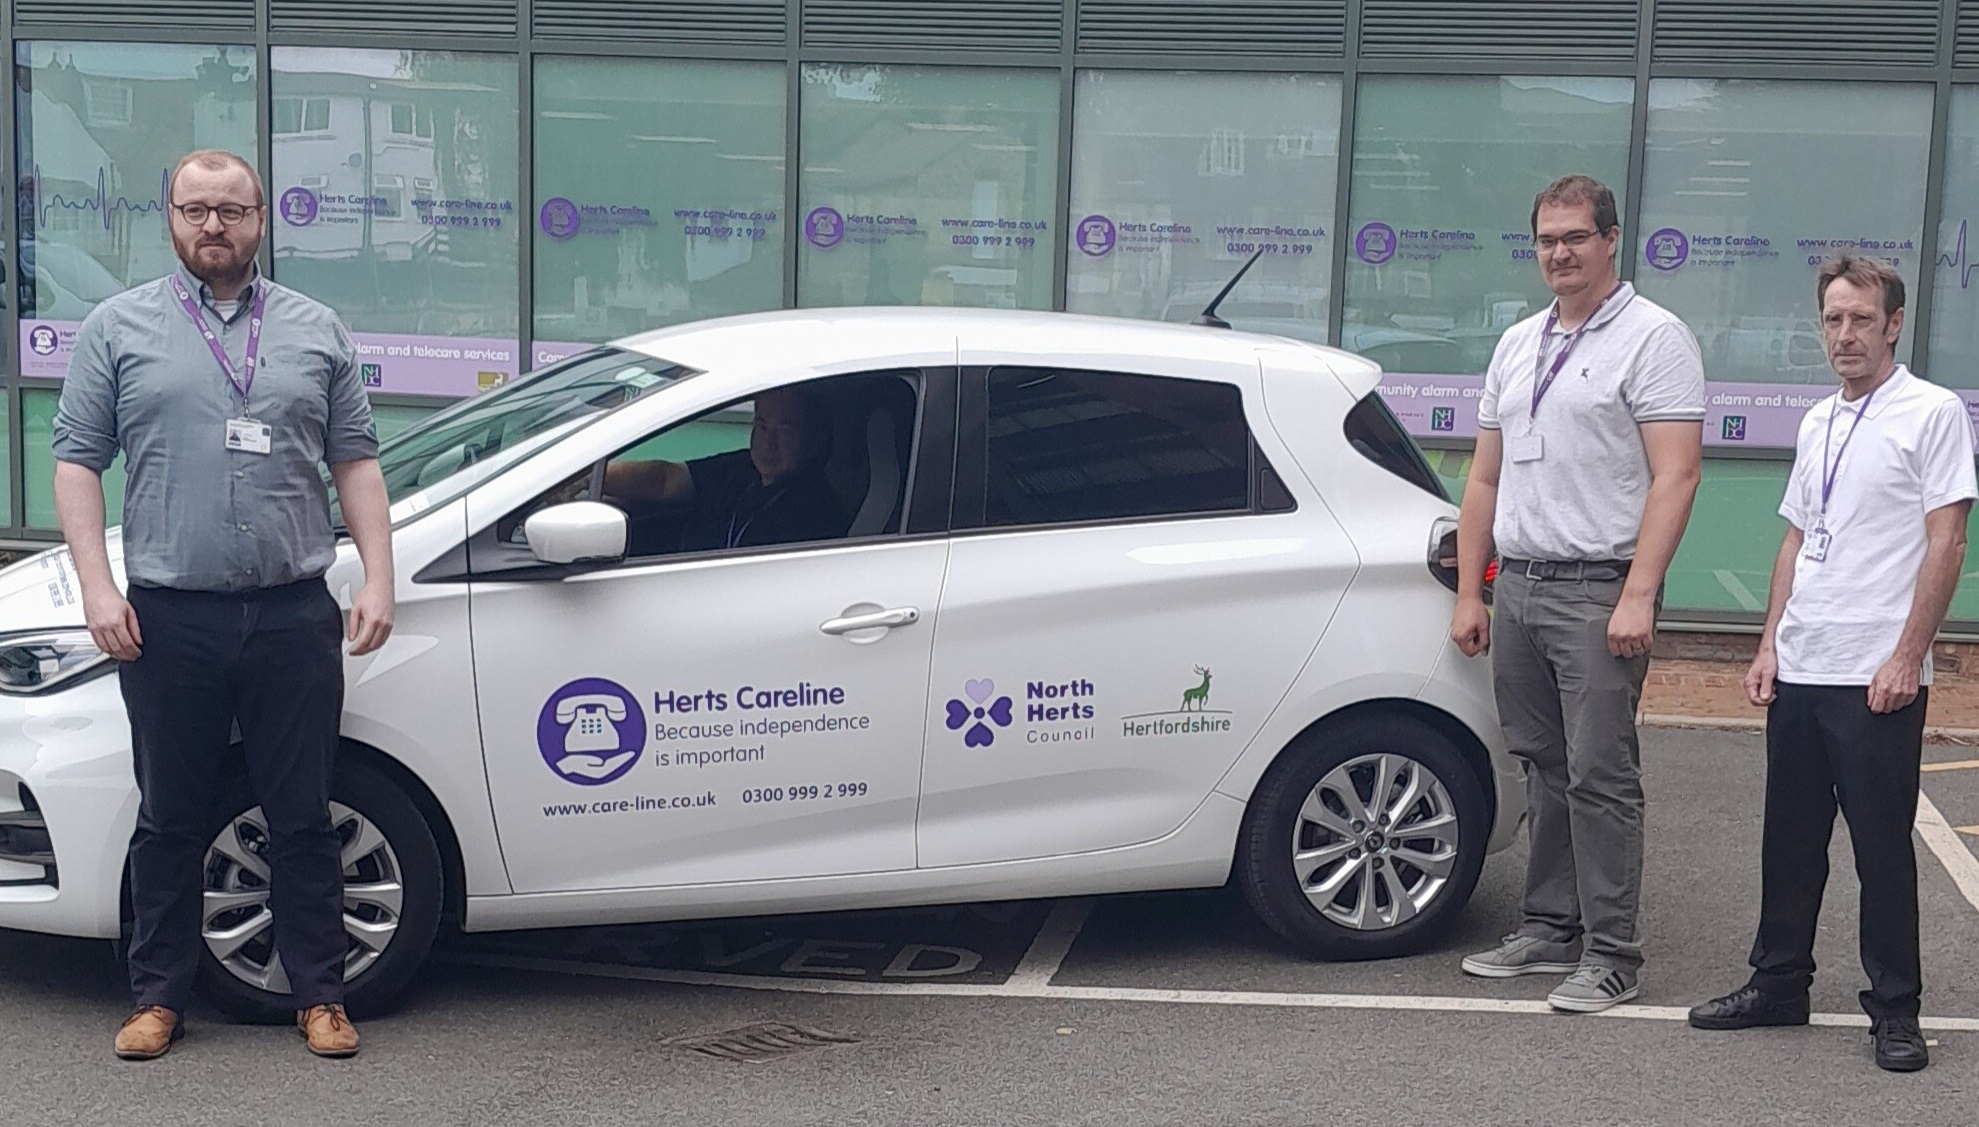 Herts Careline staff with their electric van